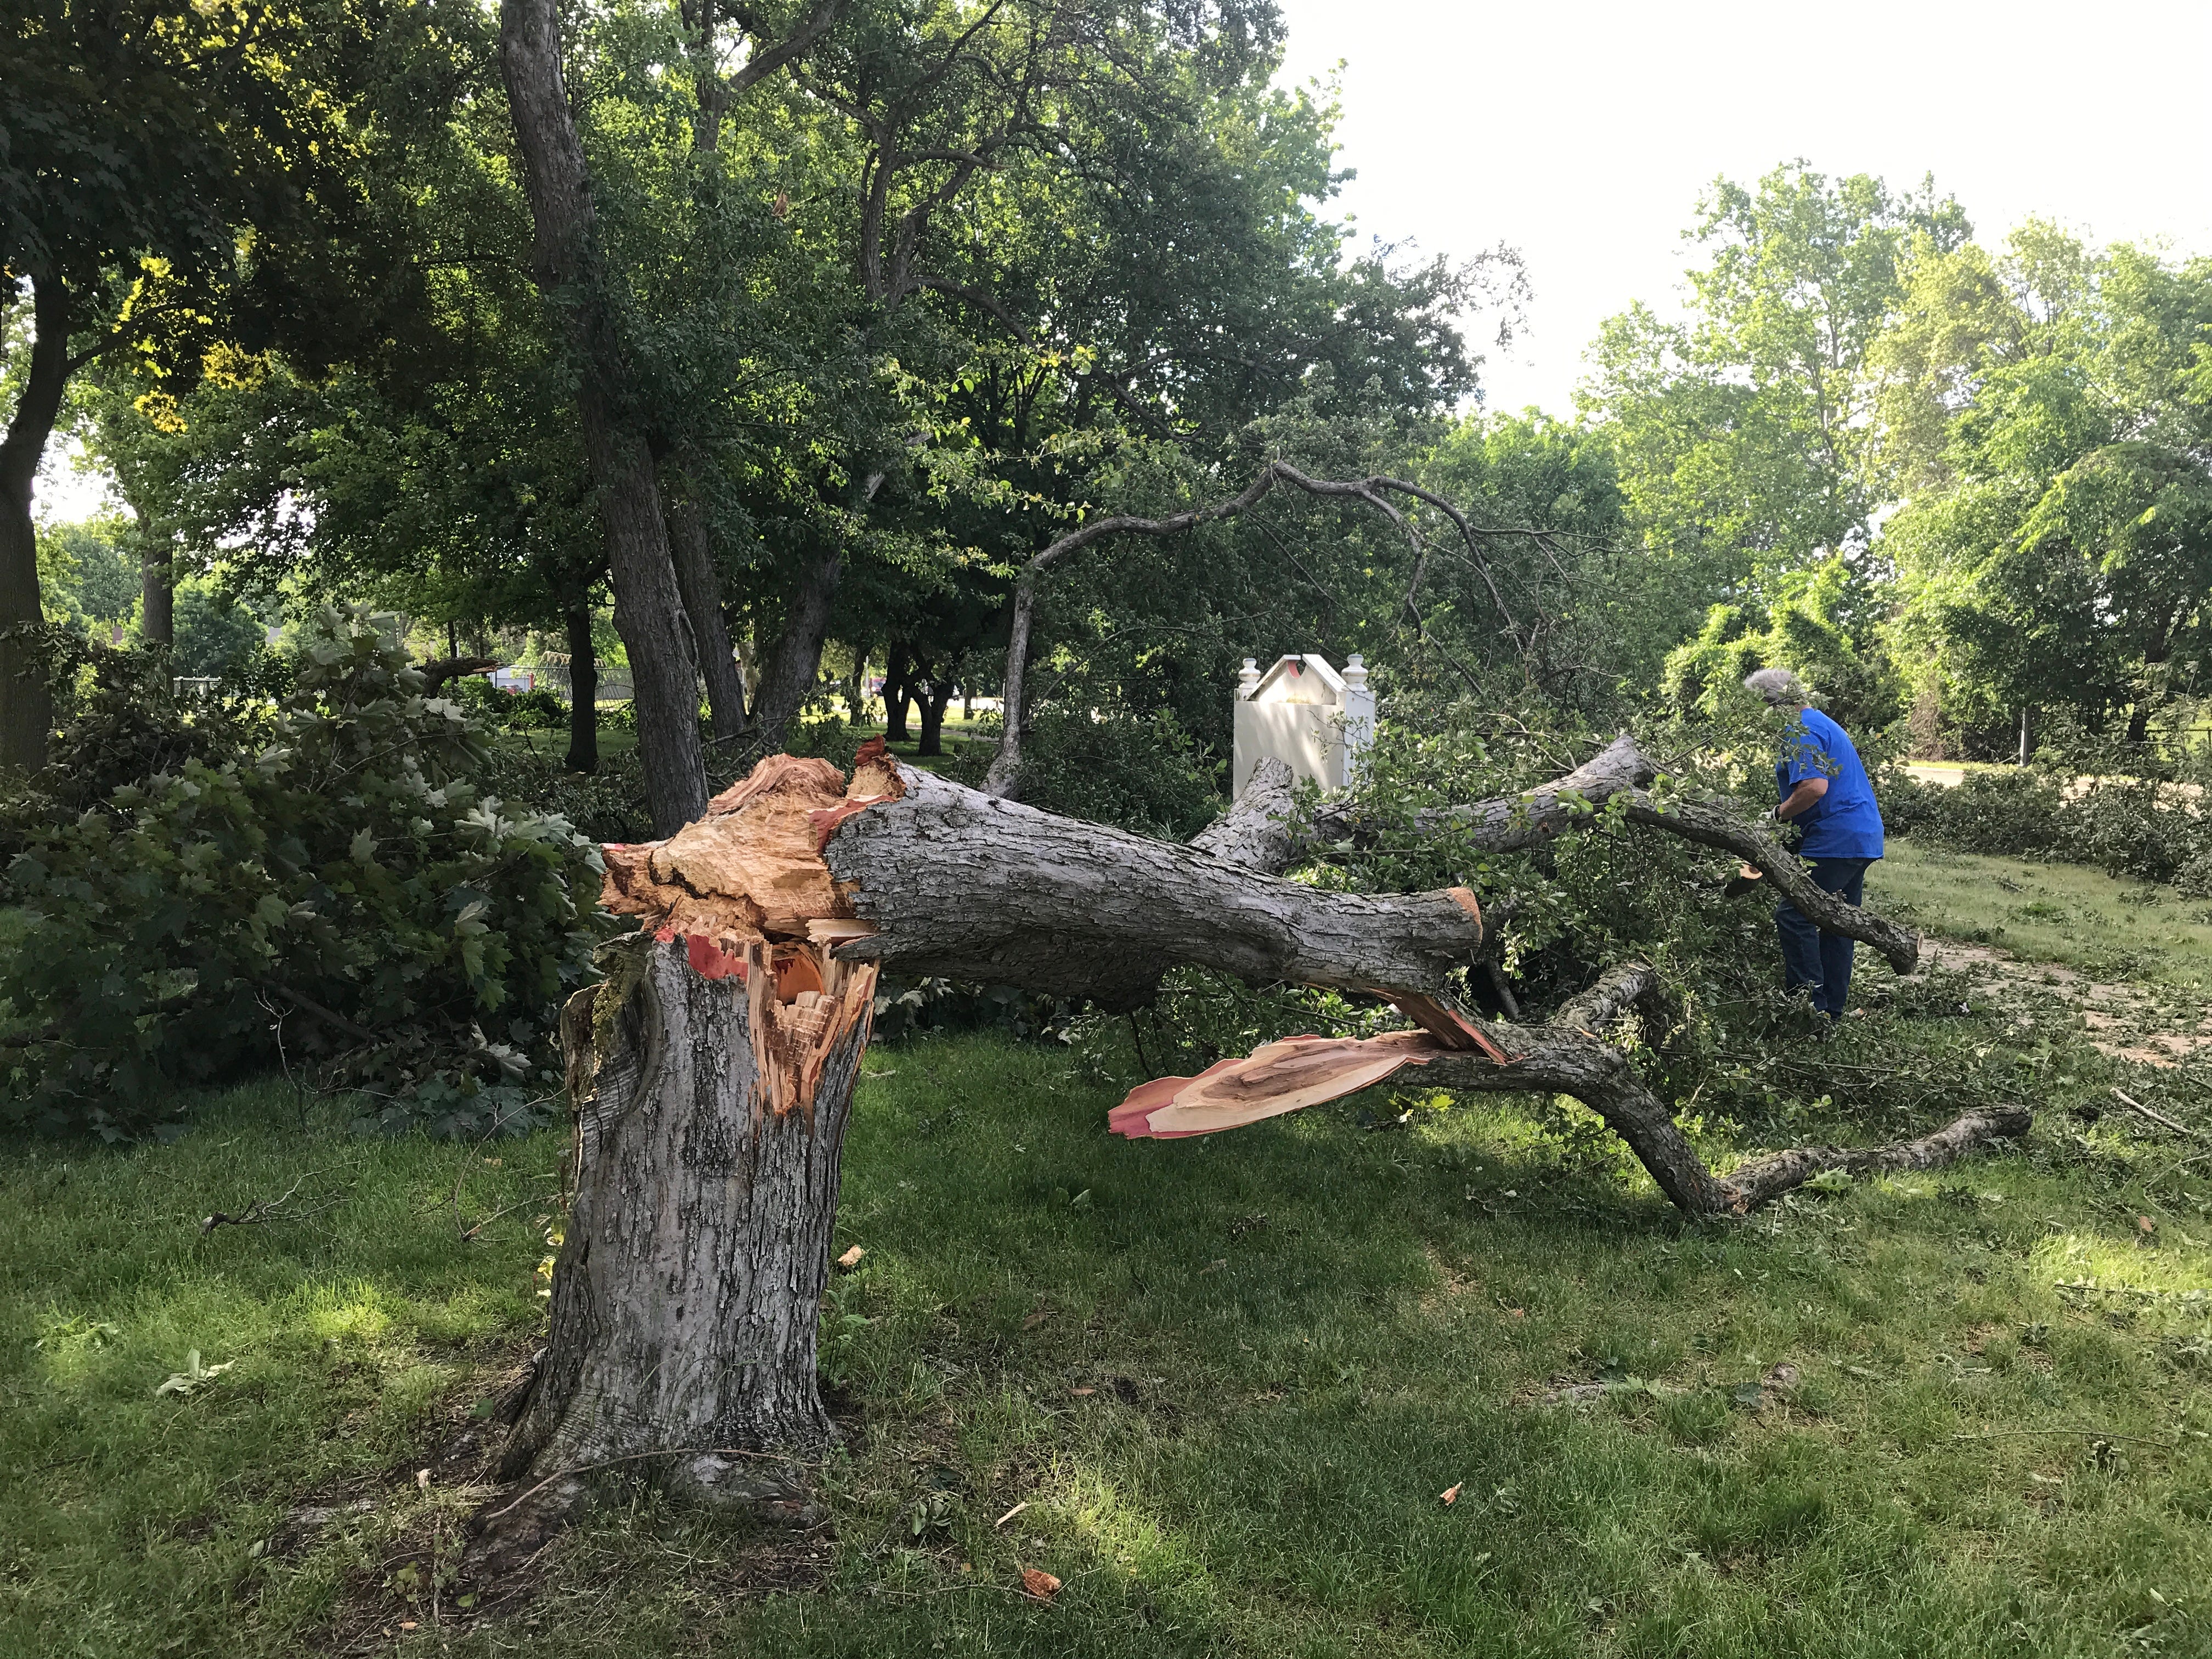 High winds brought down trees in front of Mason Elementary School in Grosse Pointe Woods.